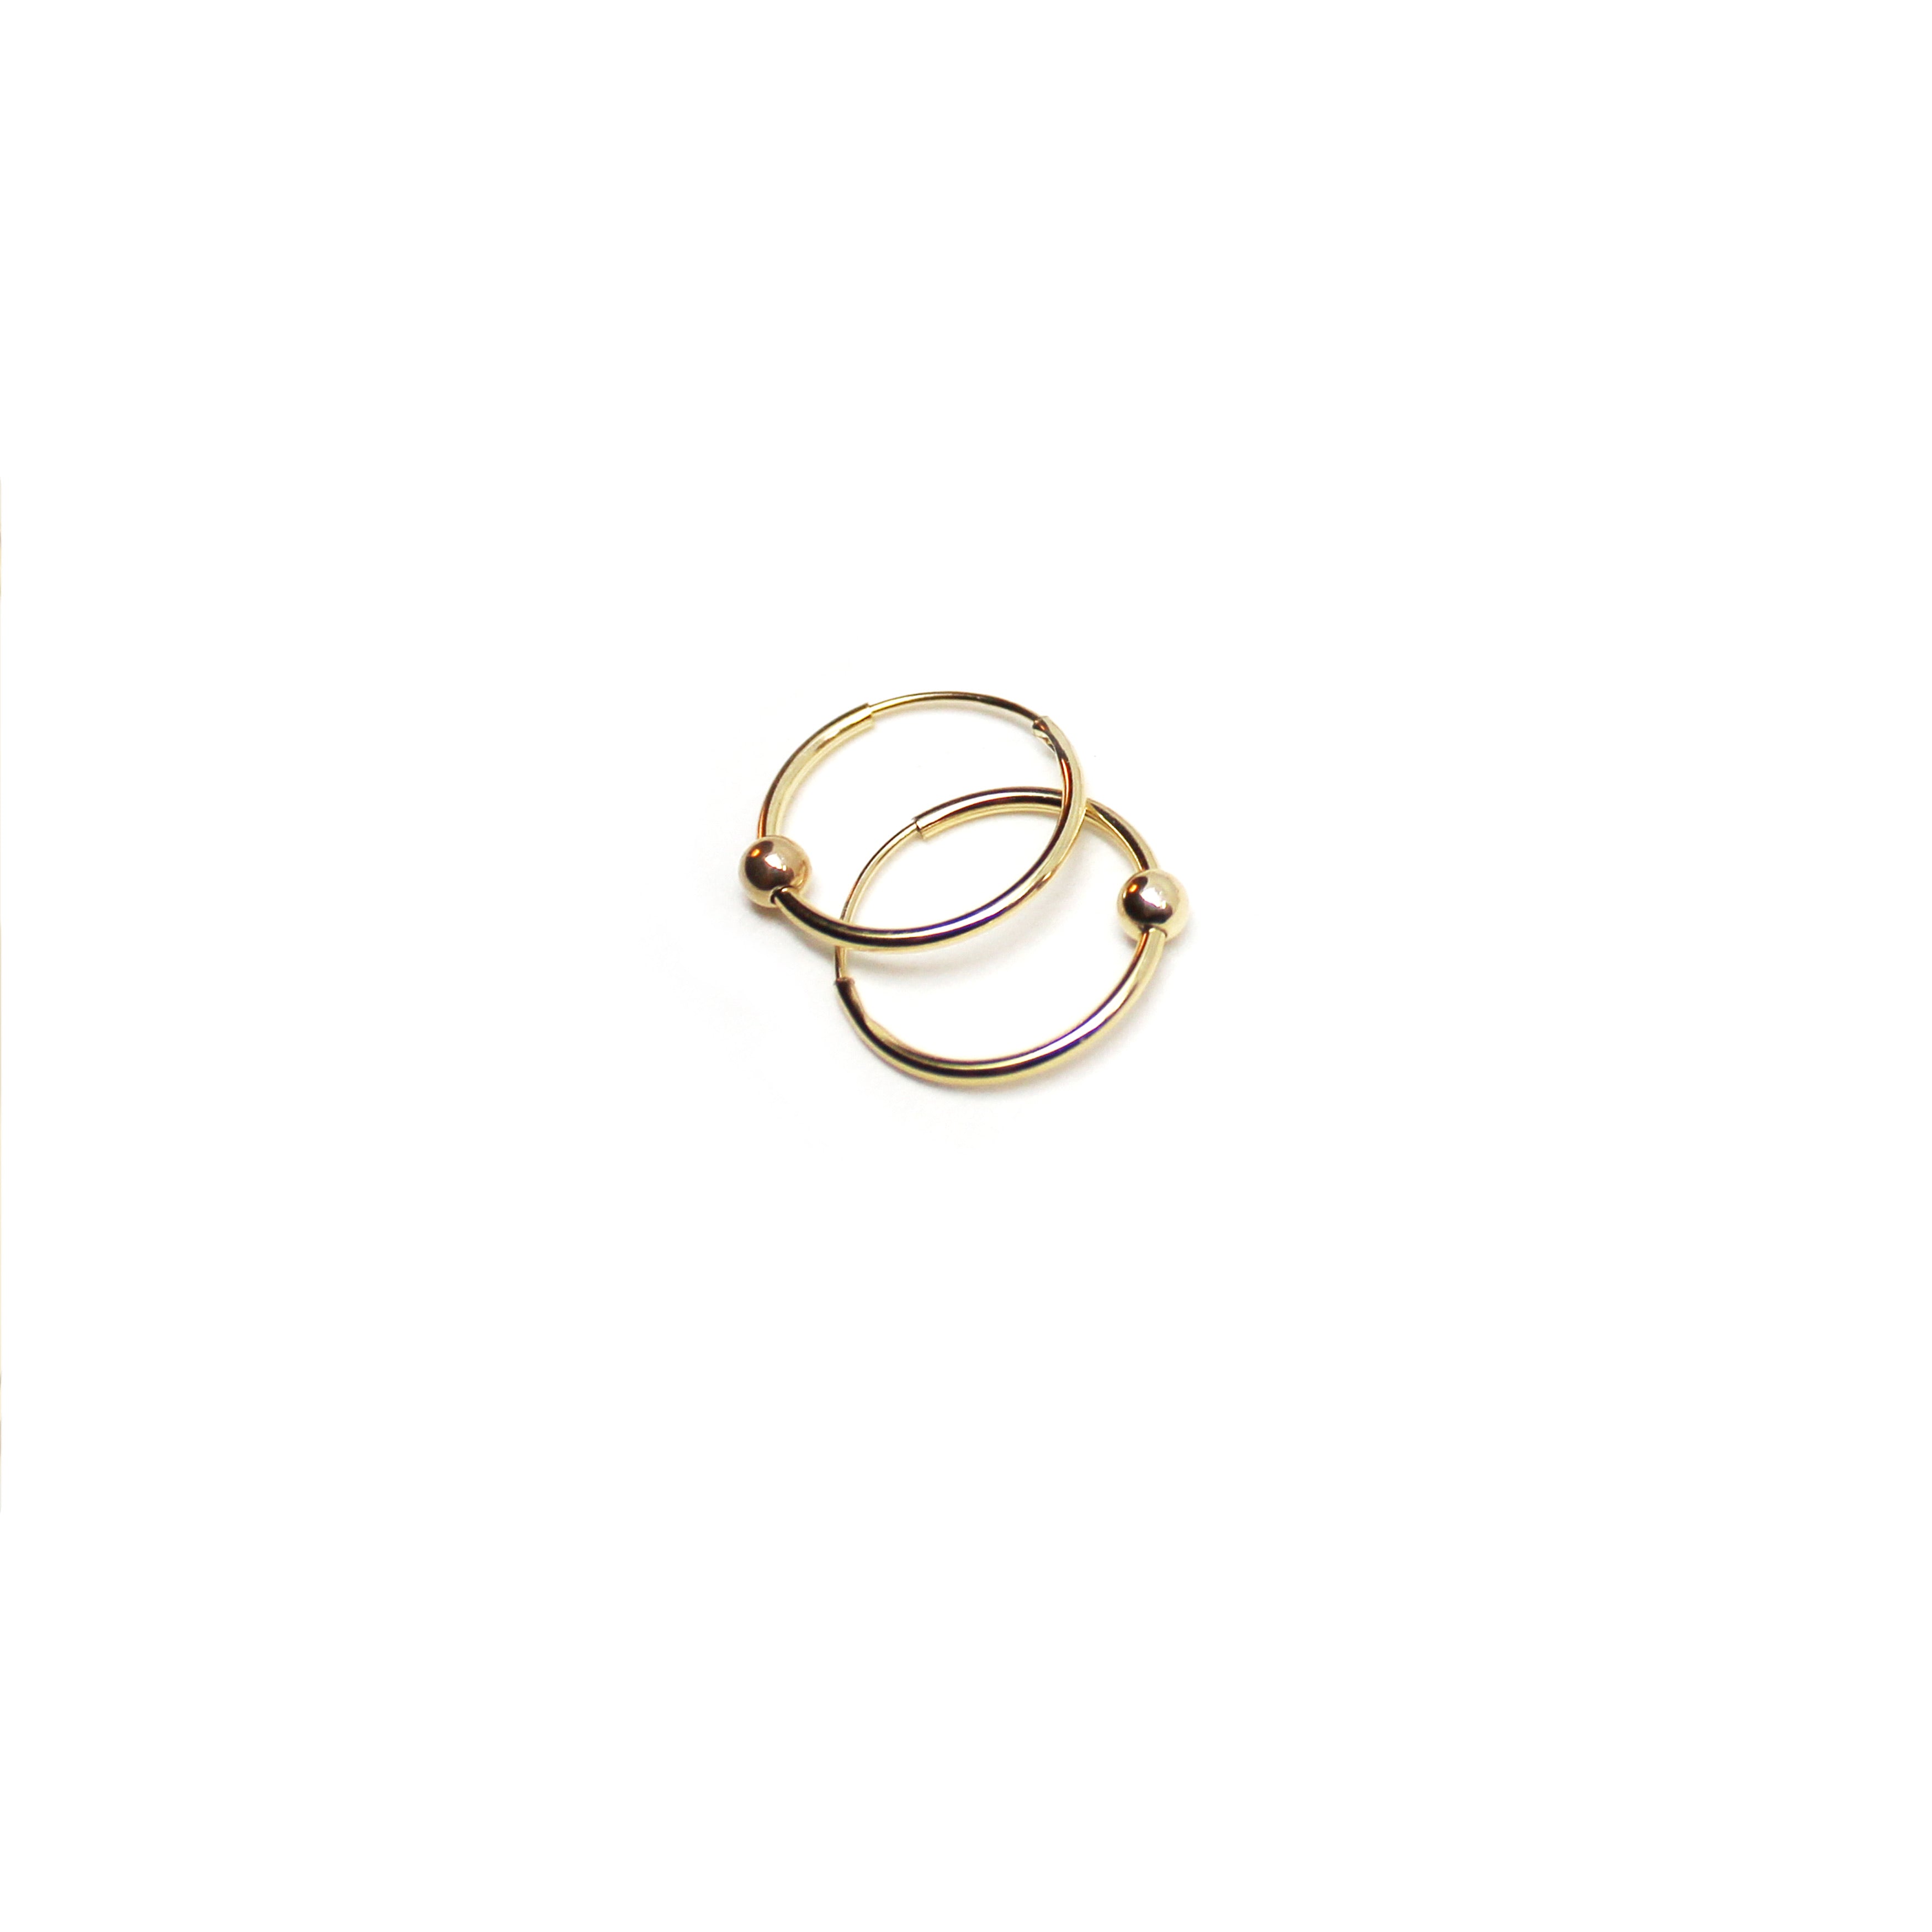 PETITS LUXE - 14k Yellow Gold Endless Hoops